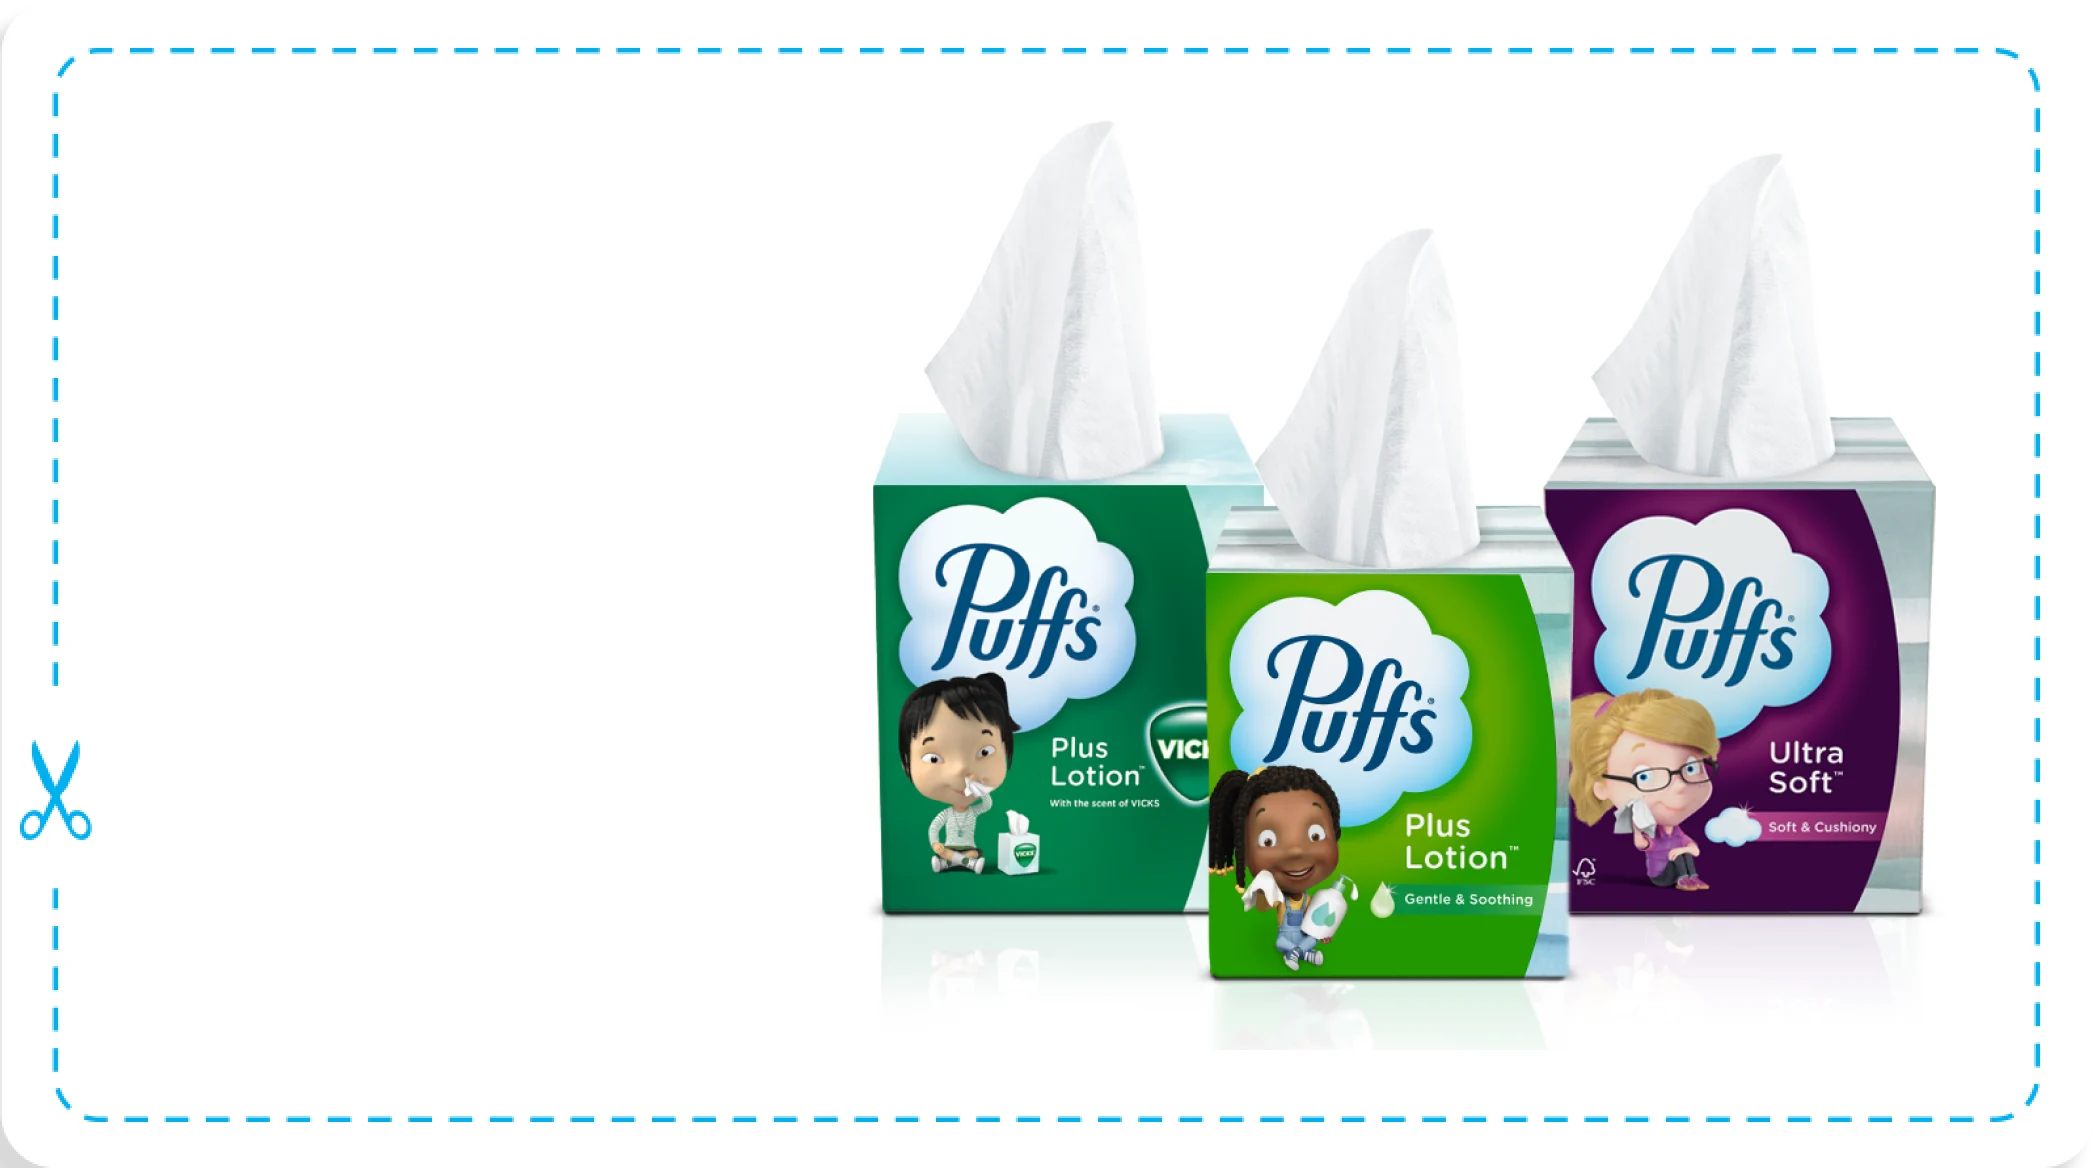 Save on our most popular products --  Plus Lotion, Ultra Soft, and Plus Lotion with the Scent of Vicks